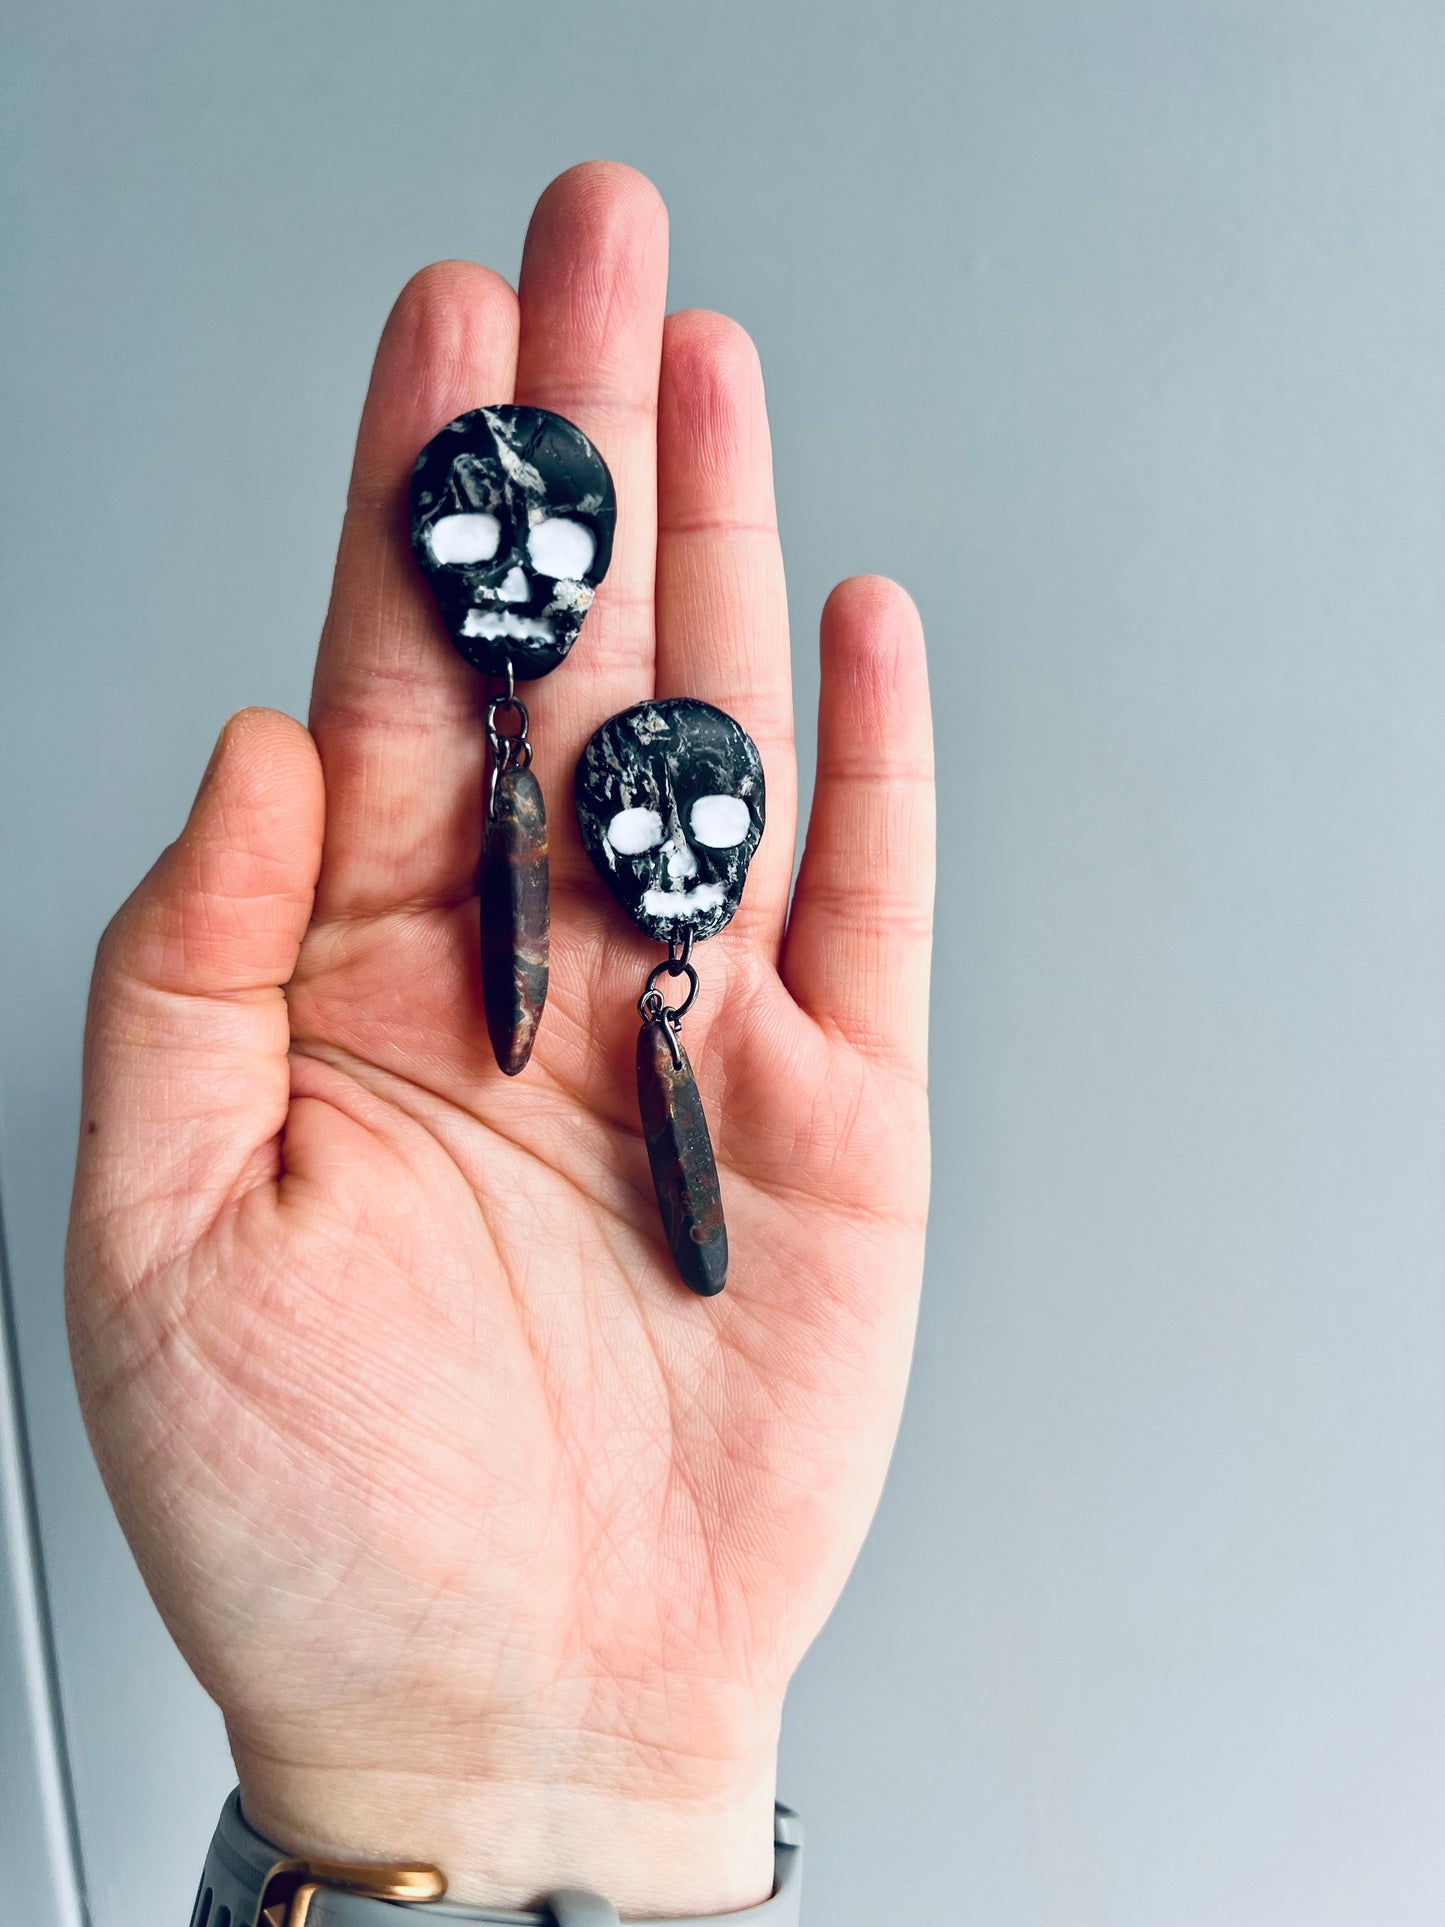 Channel the mystique of the unknown with our skull earrings, perfect for those seeking spiritual enlightenment.